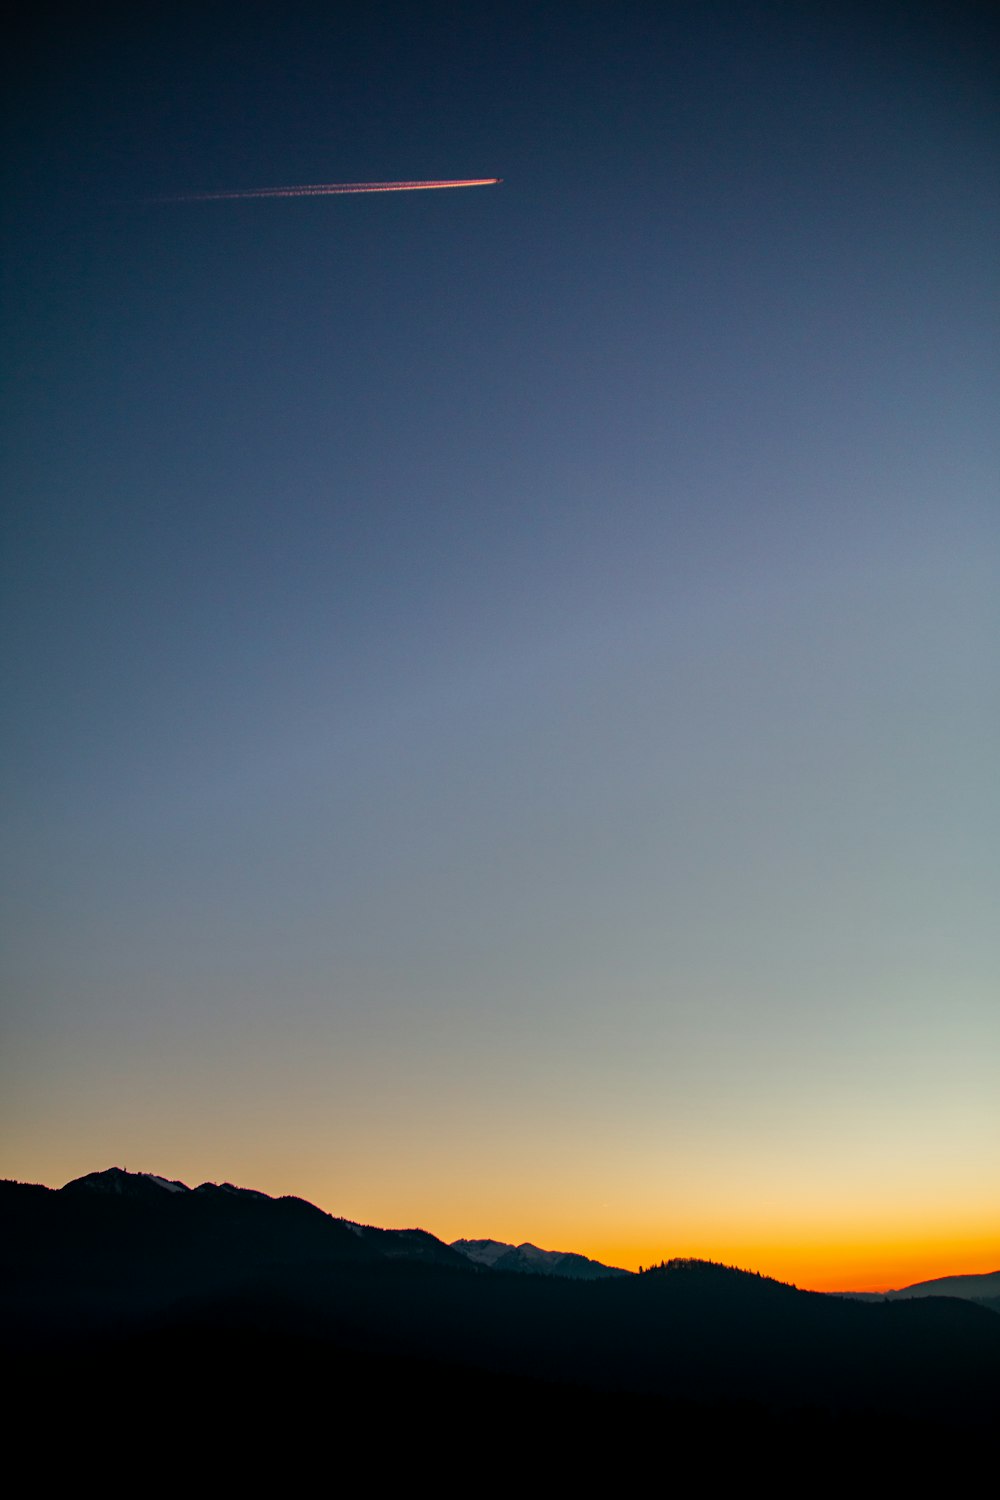 silhouette of mountain under blue and orange skies